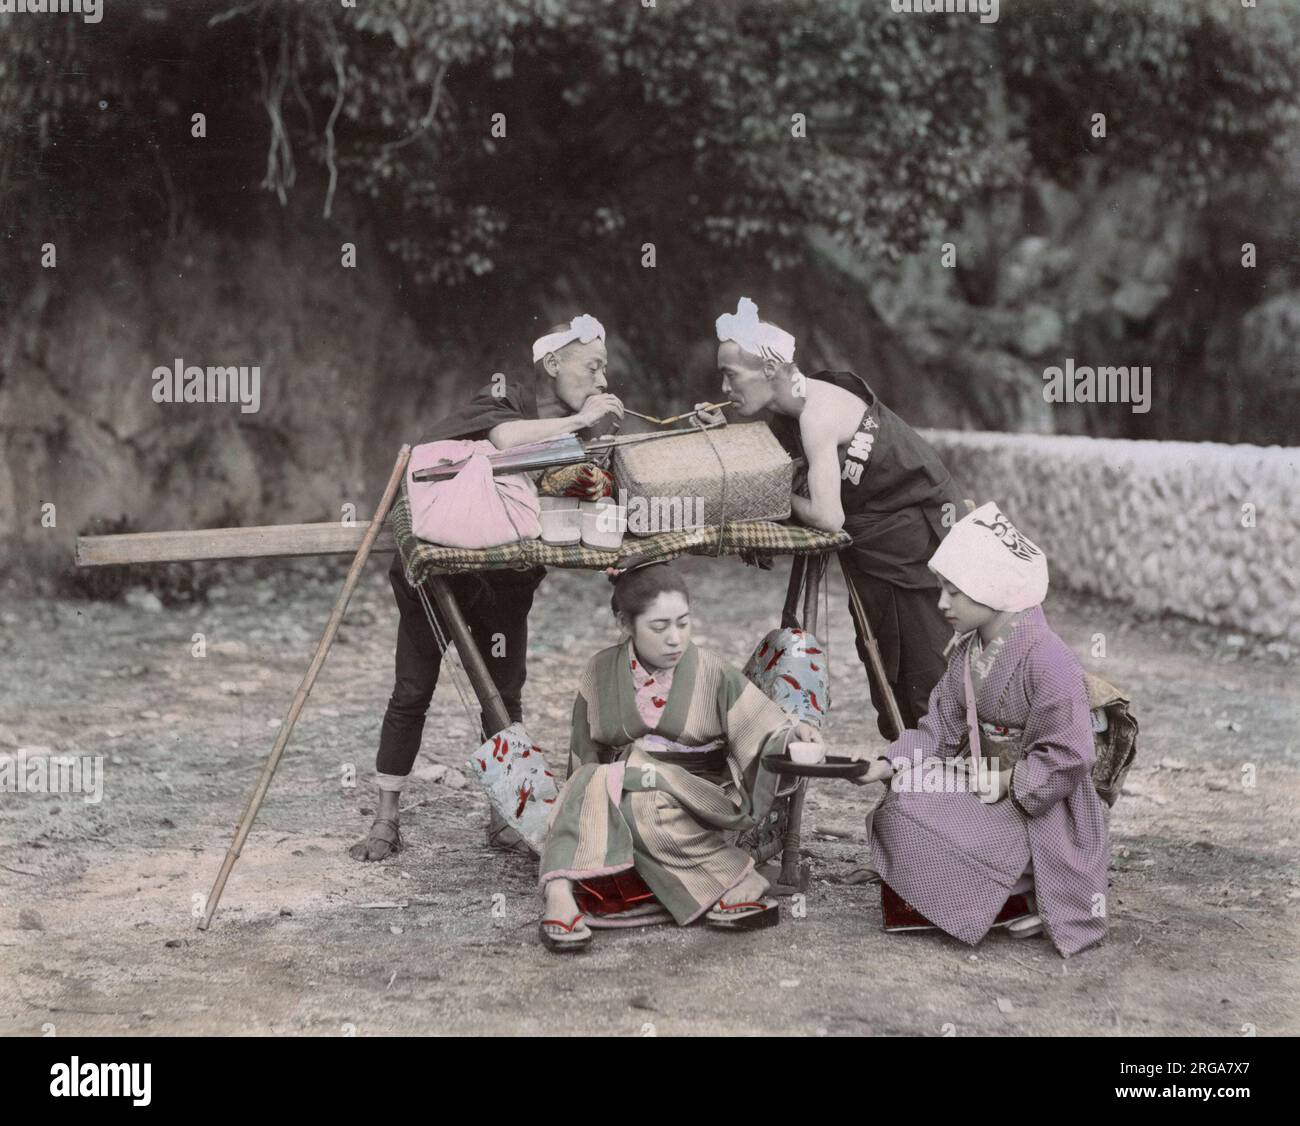 Young woman being carried in a kago, carrying chair, being served tea. Vintage 19th century photograph. Stock Photo